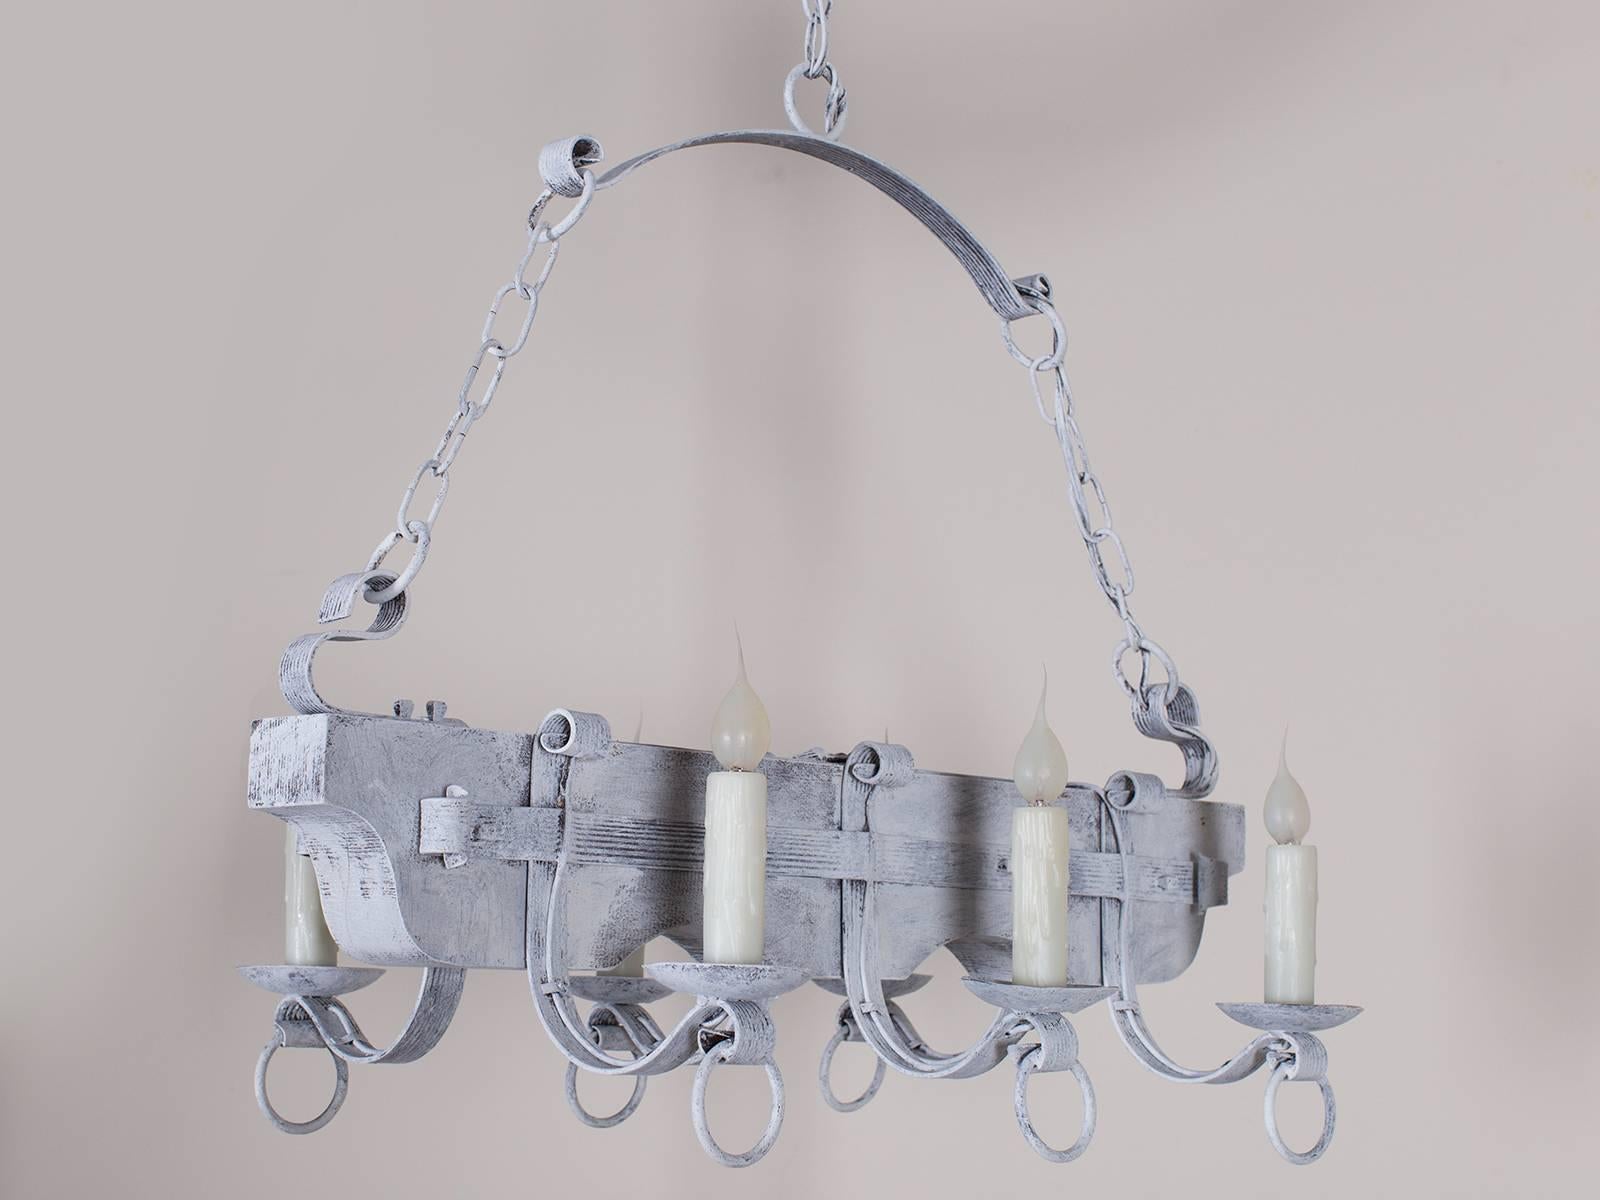 A vintage French painted wood and iron chandelier circa 1940 with an interesting arrangement of iron strap work supporting the candle arms. This fixture is reminiscent of the antique ox yoke chandeliers and has been rewired for American electricity.